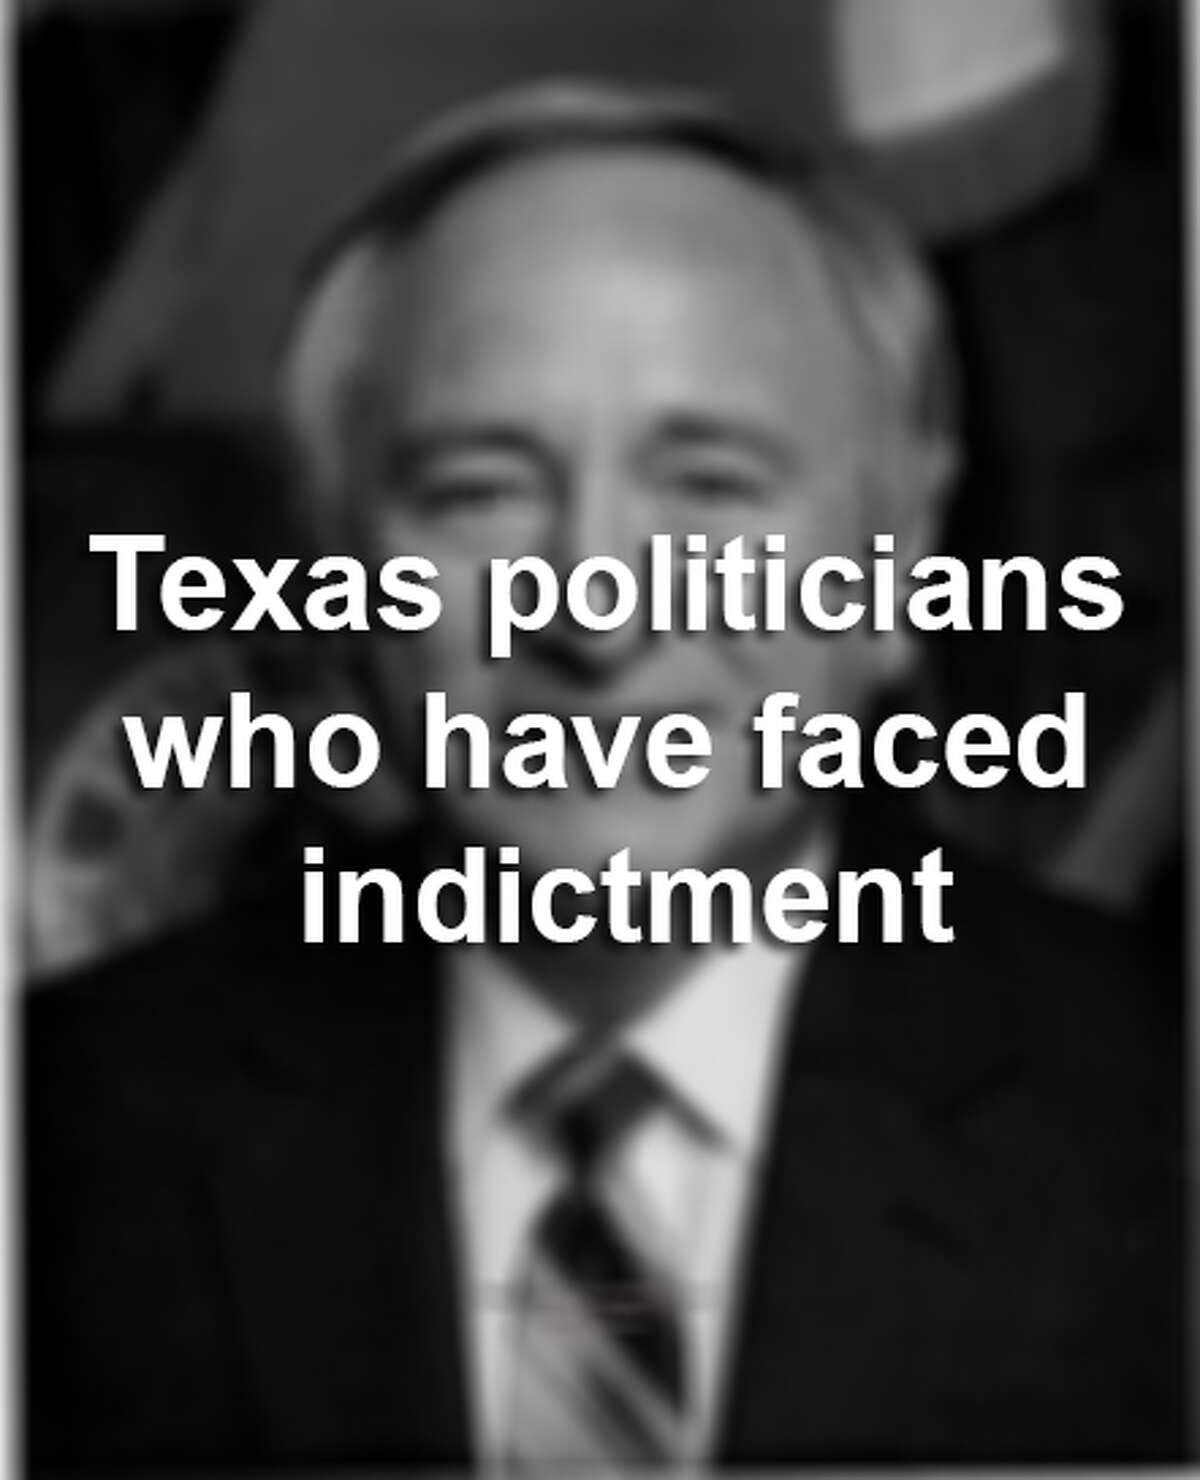 Texas politicians who have faced indictment